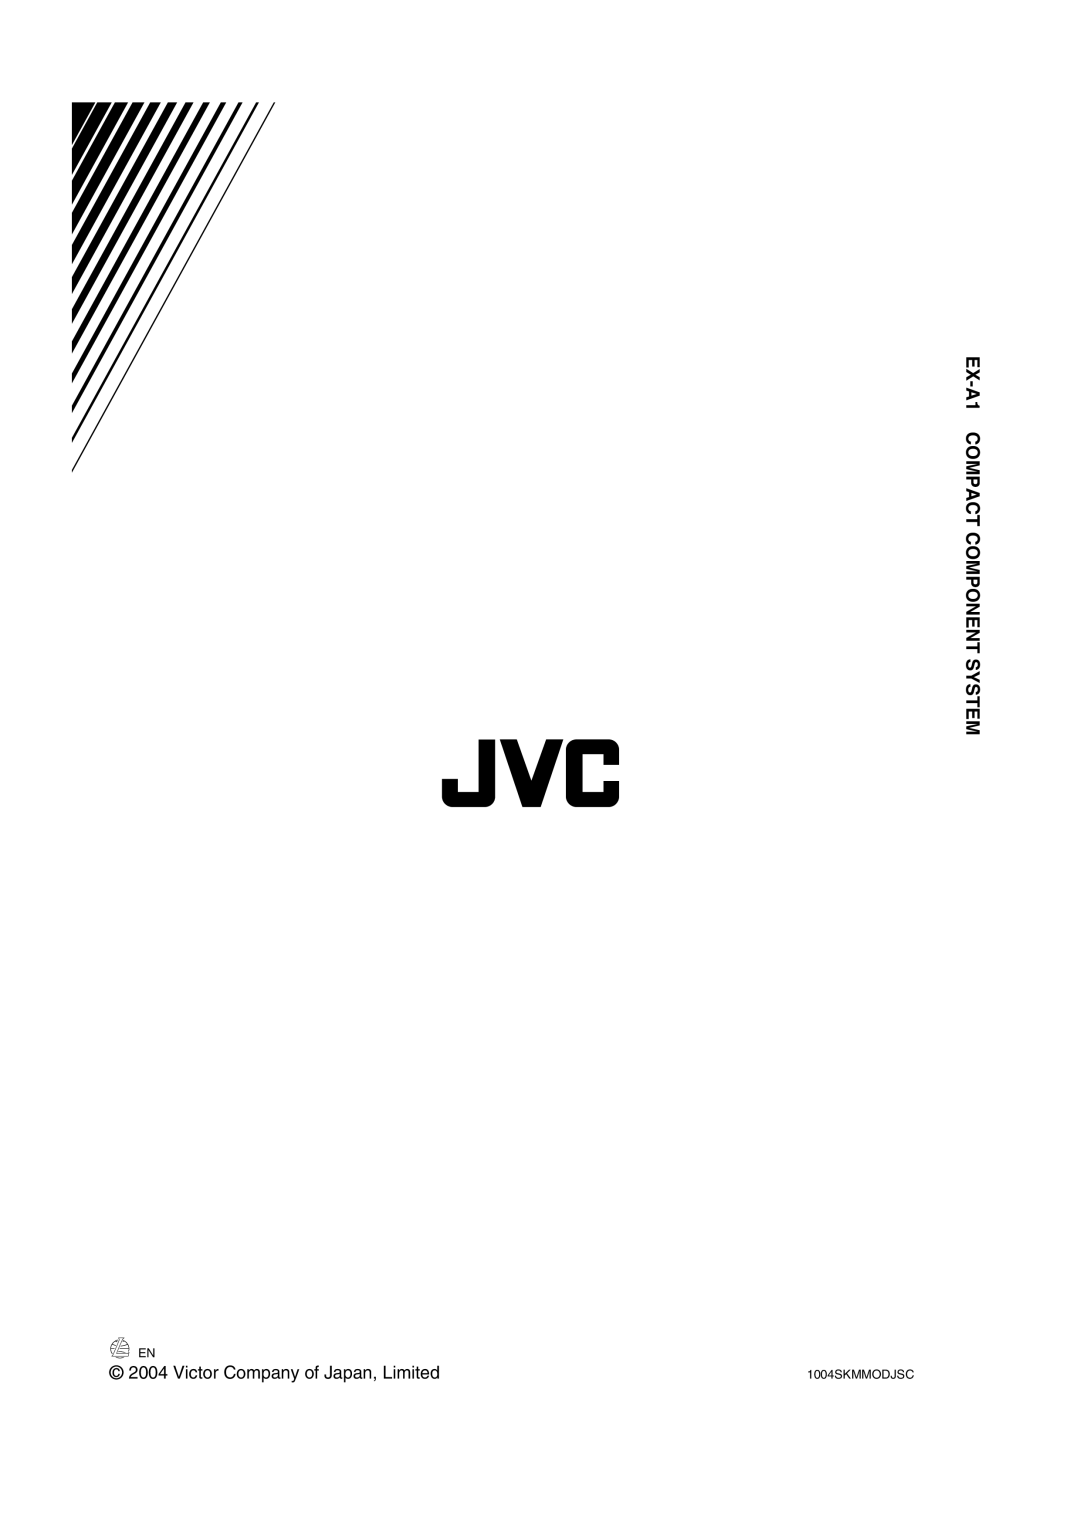 JVC manual EX-A1COMPACT COMPONENT SYSTEM, c 2004 Victor Company of Japan, Limited, 1004SKMMODJSC 